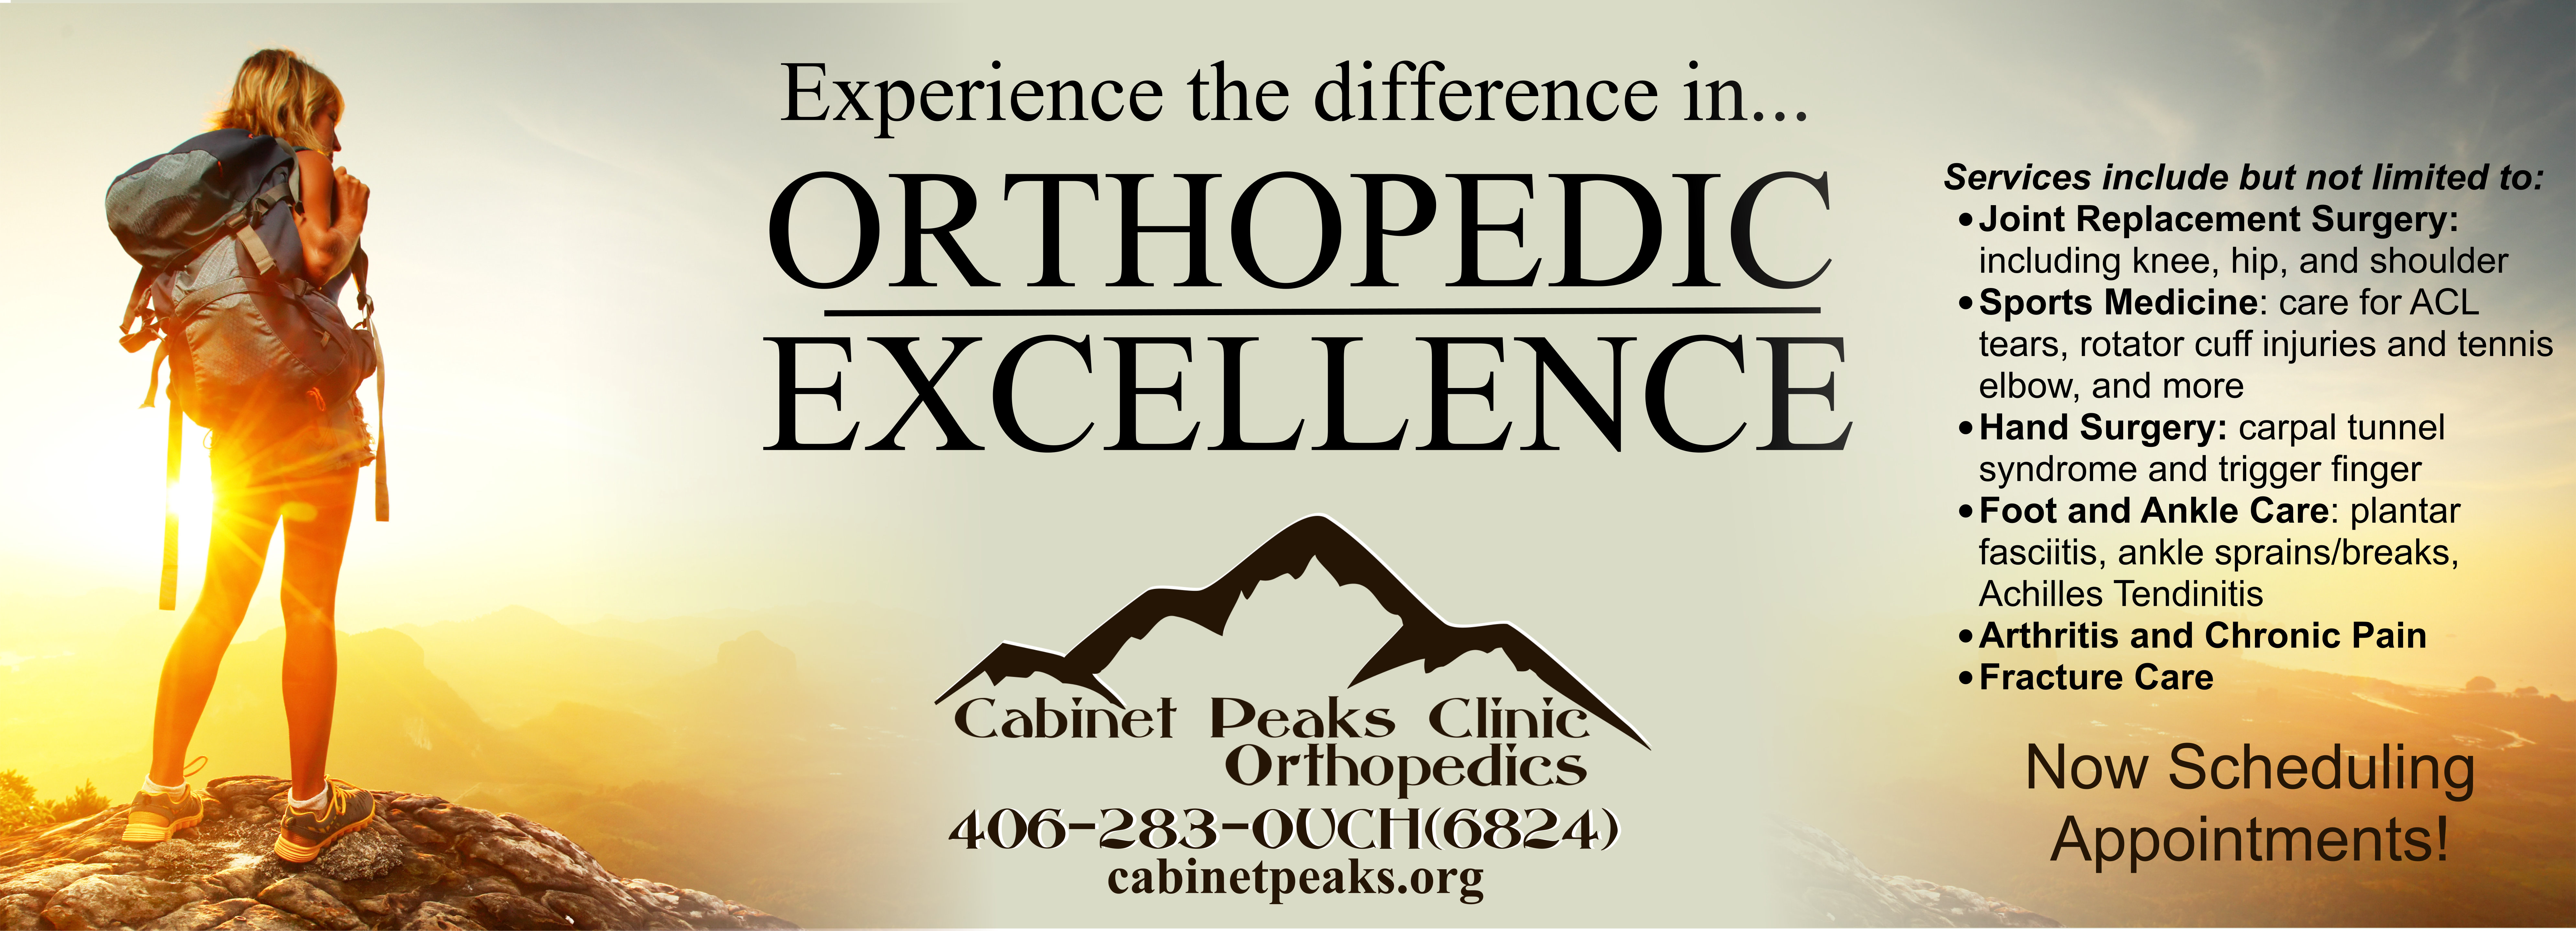 Experience the difference in Orthopedic Excellence

Services include but not limited to:
* Joint Replacement Surgery:
including knee, hip, and shoulder 

* Sports Medicine: care for AXL tears, rotator cuff injuries  and tennis elbow elbow, and more

*Hand Surgery: Carpal tunnel syndrome and trigger finger

*Foot and Ankle Care: plantar fasciitis, ankle sprains /breaks, Achilles Tendinitis 

*Arthritis and Chronic Pain

* Fracture Care

Now Scheduling Appointments!


Cabinet Peaks Clinic Orthopedics 
406-283-OUCH (6824)
cabinetpeaks.org